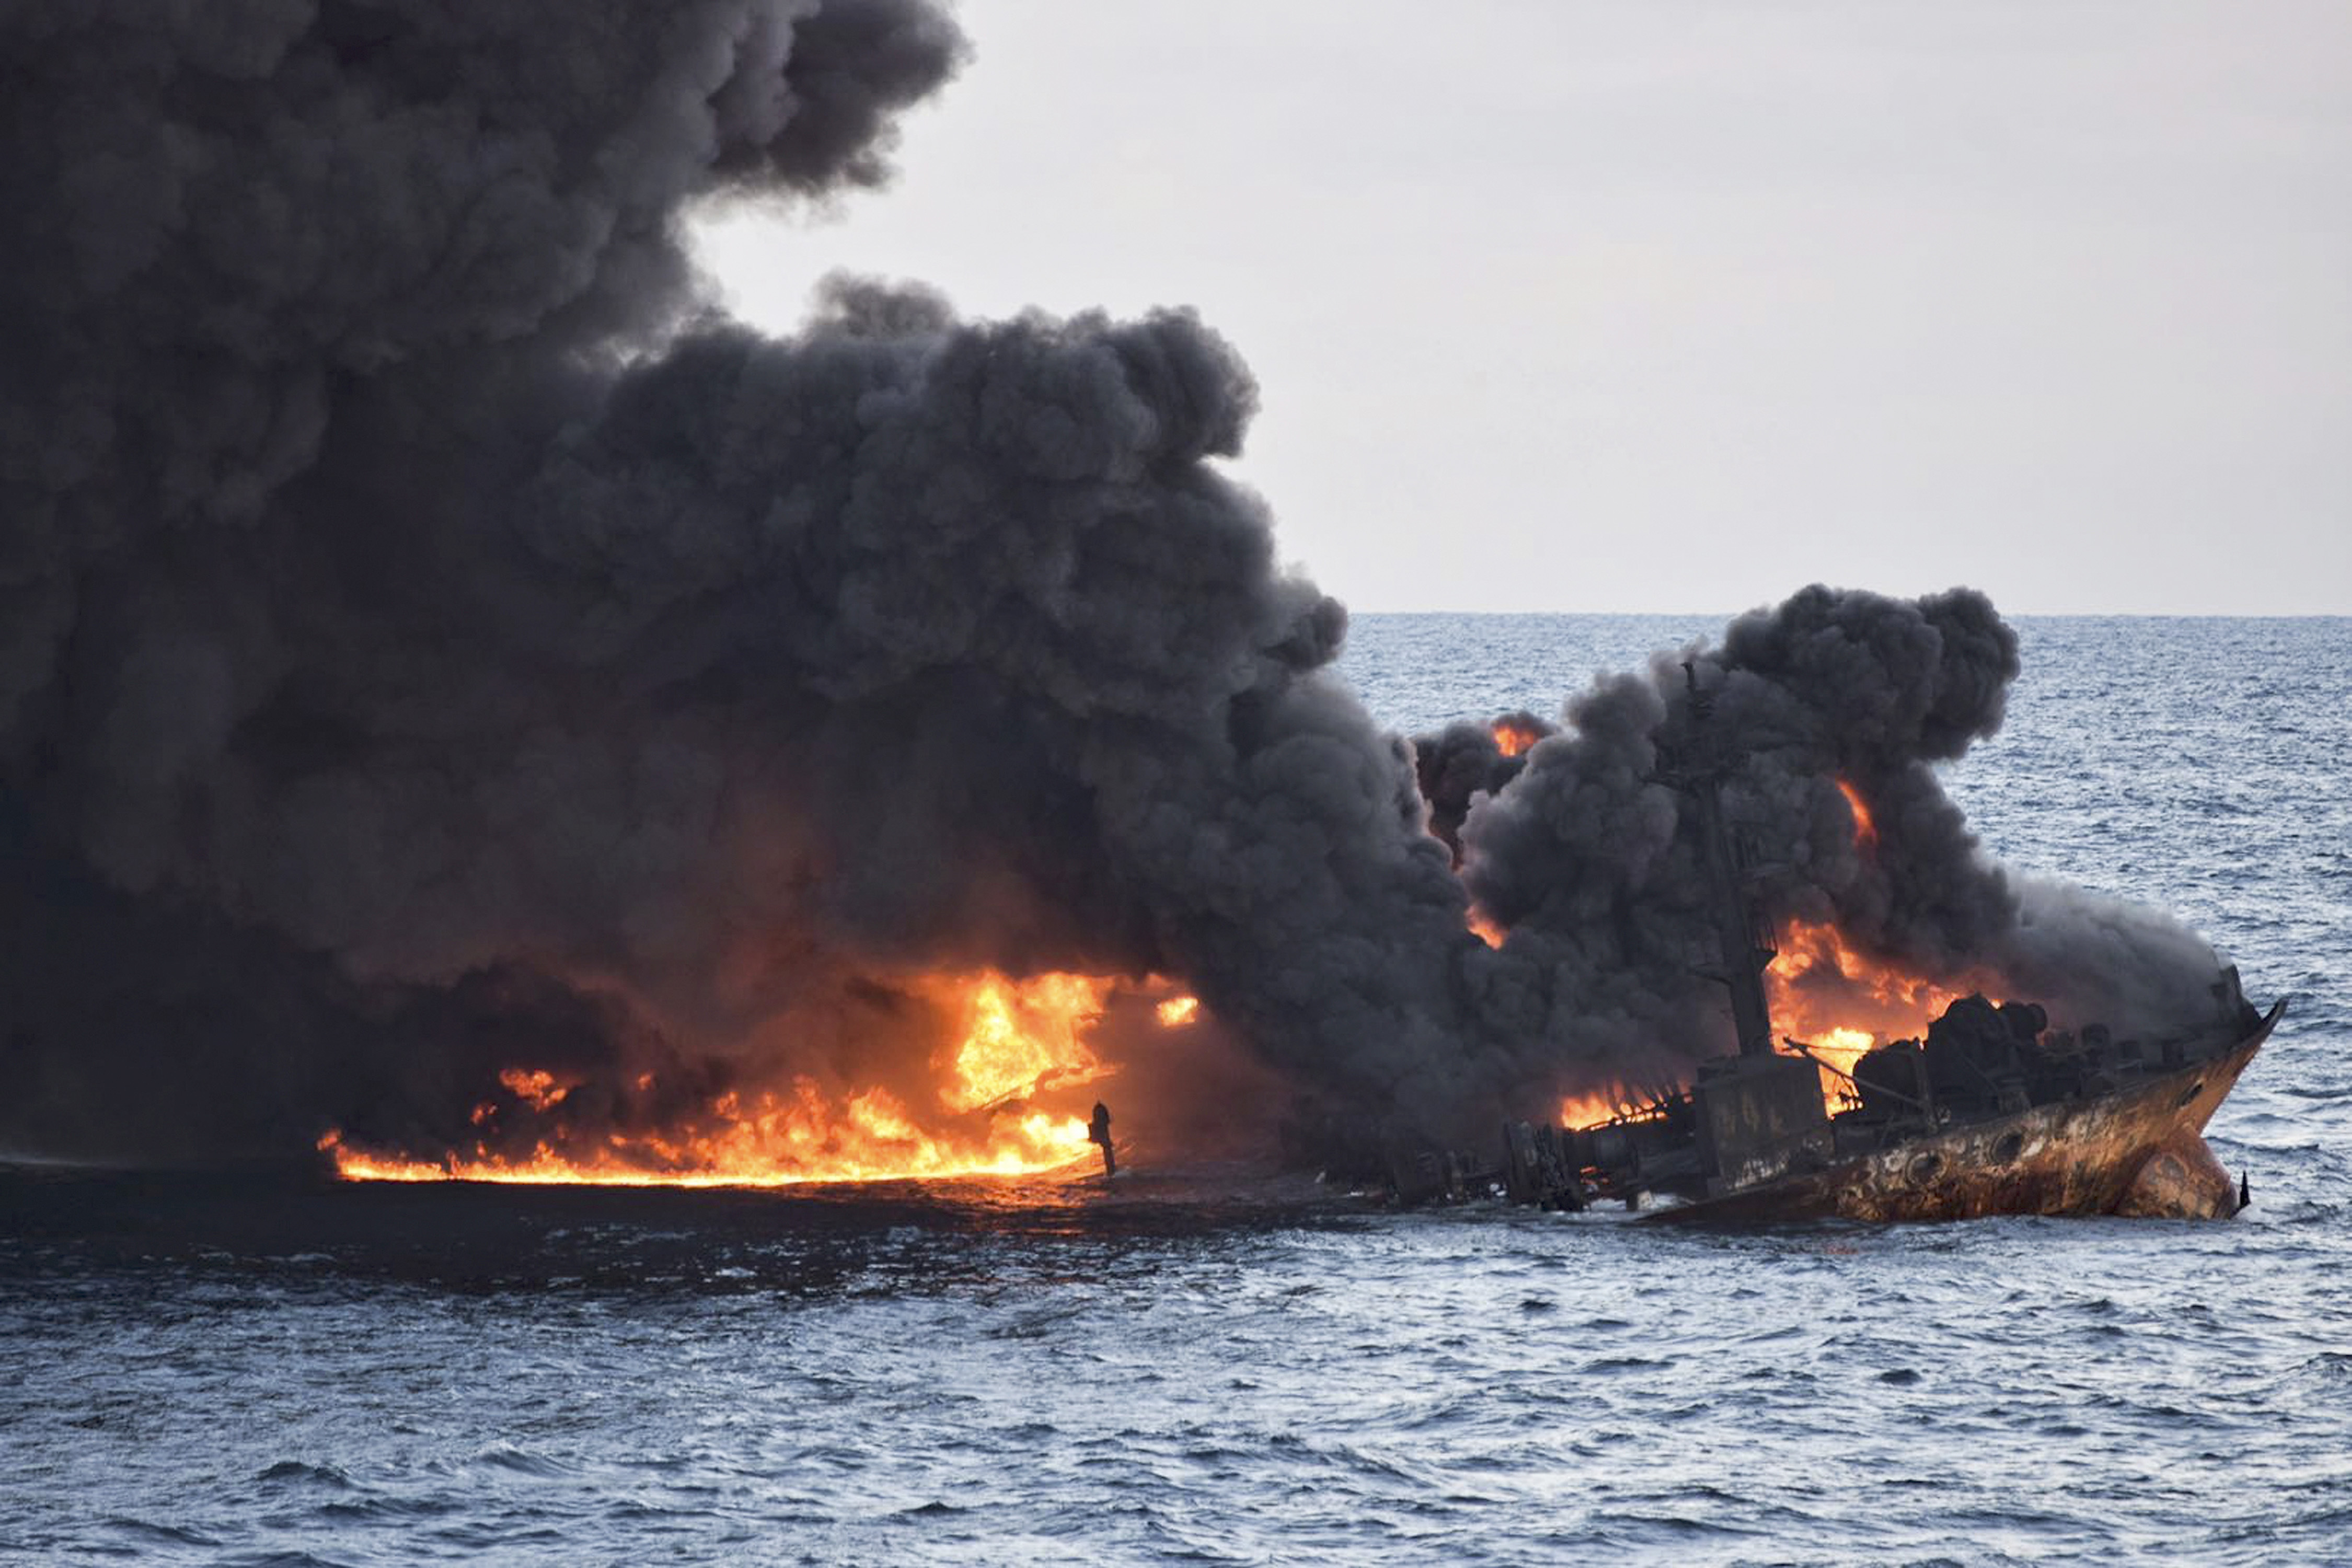 In this Sunday, Jan. 14, 2018 photo provided by China's Ministry of Transport, the burning Iranian oil tanker Sanchi is seen partially sunk in the East China Sea off the eastern coast of China. The fire from the sunken Iranian tanker ship in the East China Sea has burned out, a Chinese transport ministry spokesman said Monday, although concerns remain about possible major pollution to the sea bed and surrounding waters. (Ministry of Transport via AP)